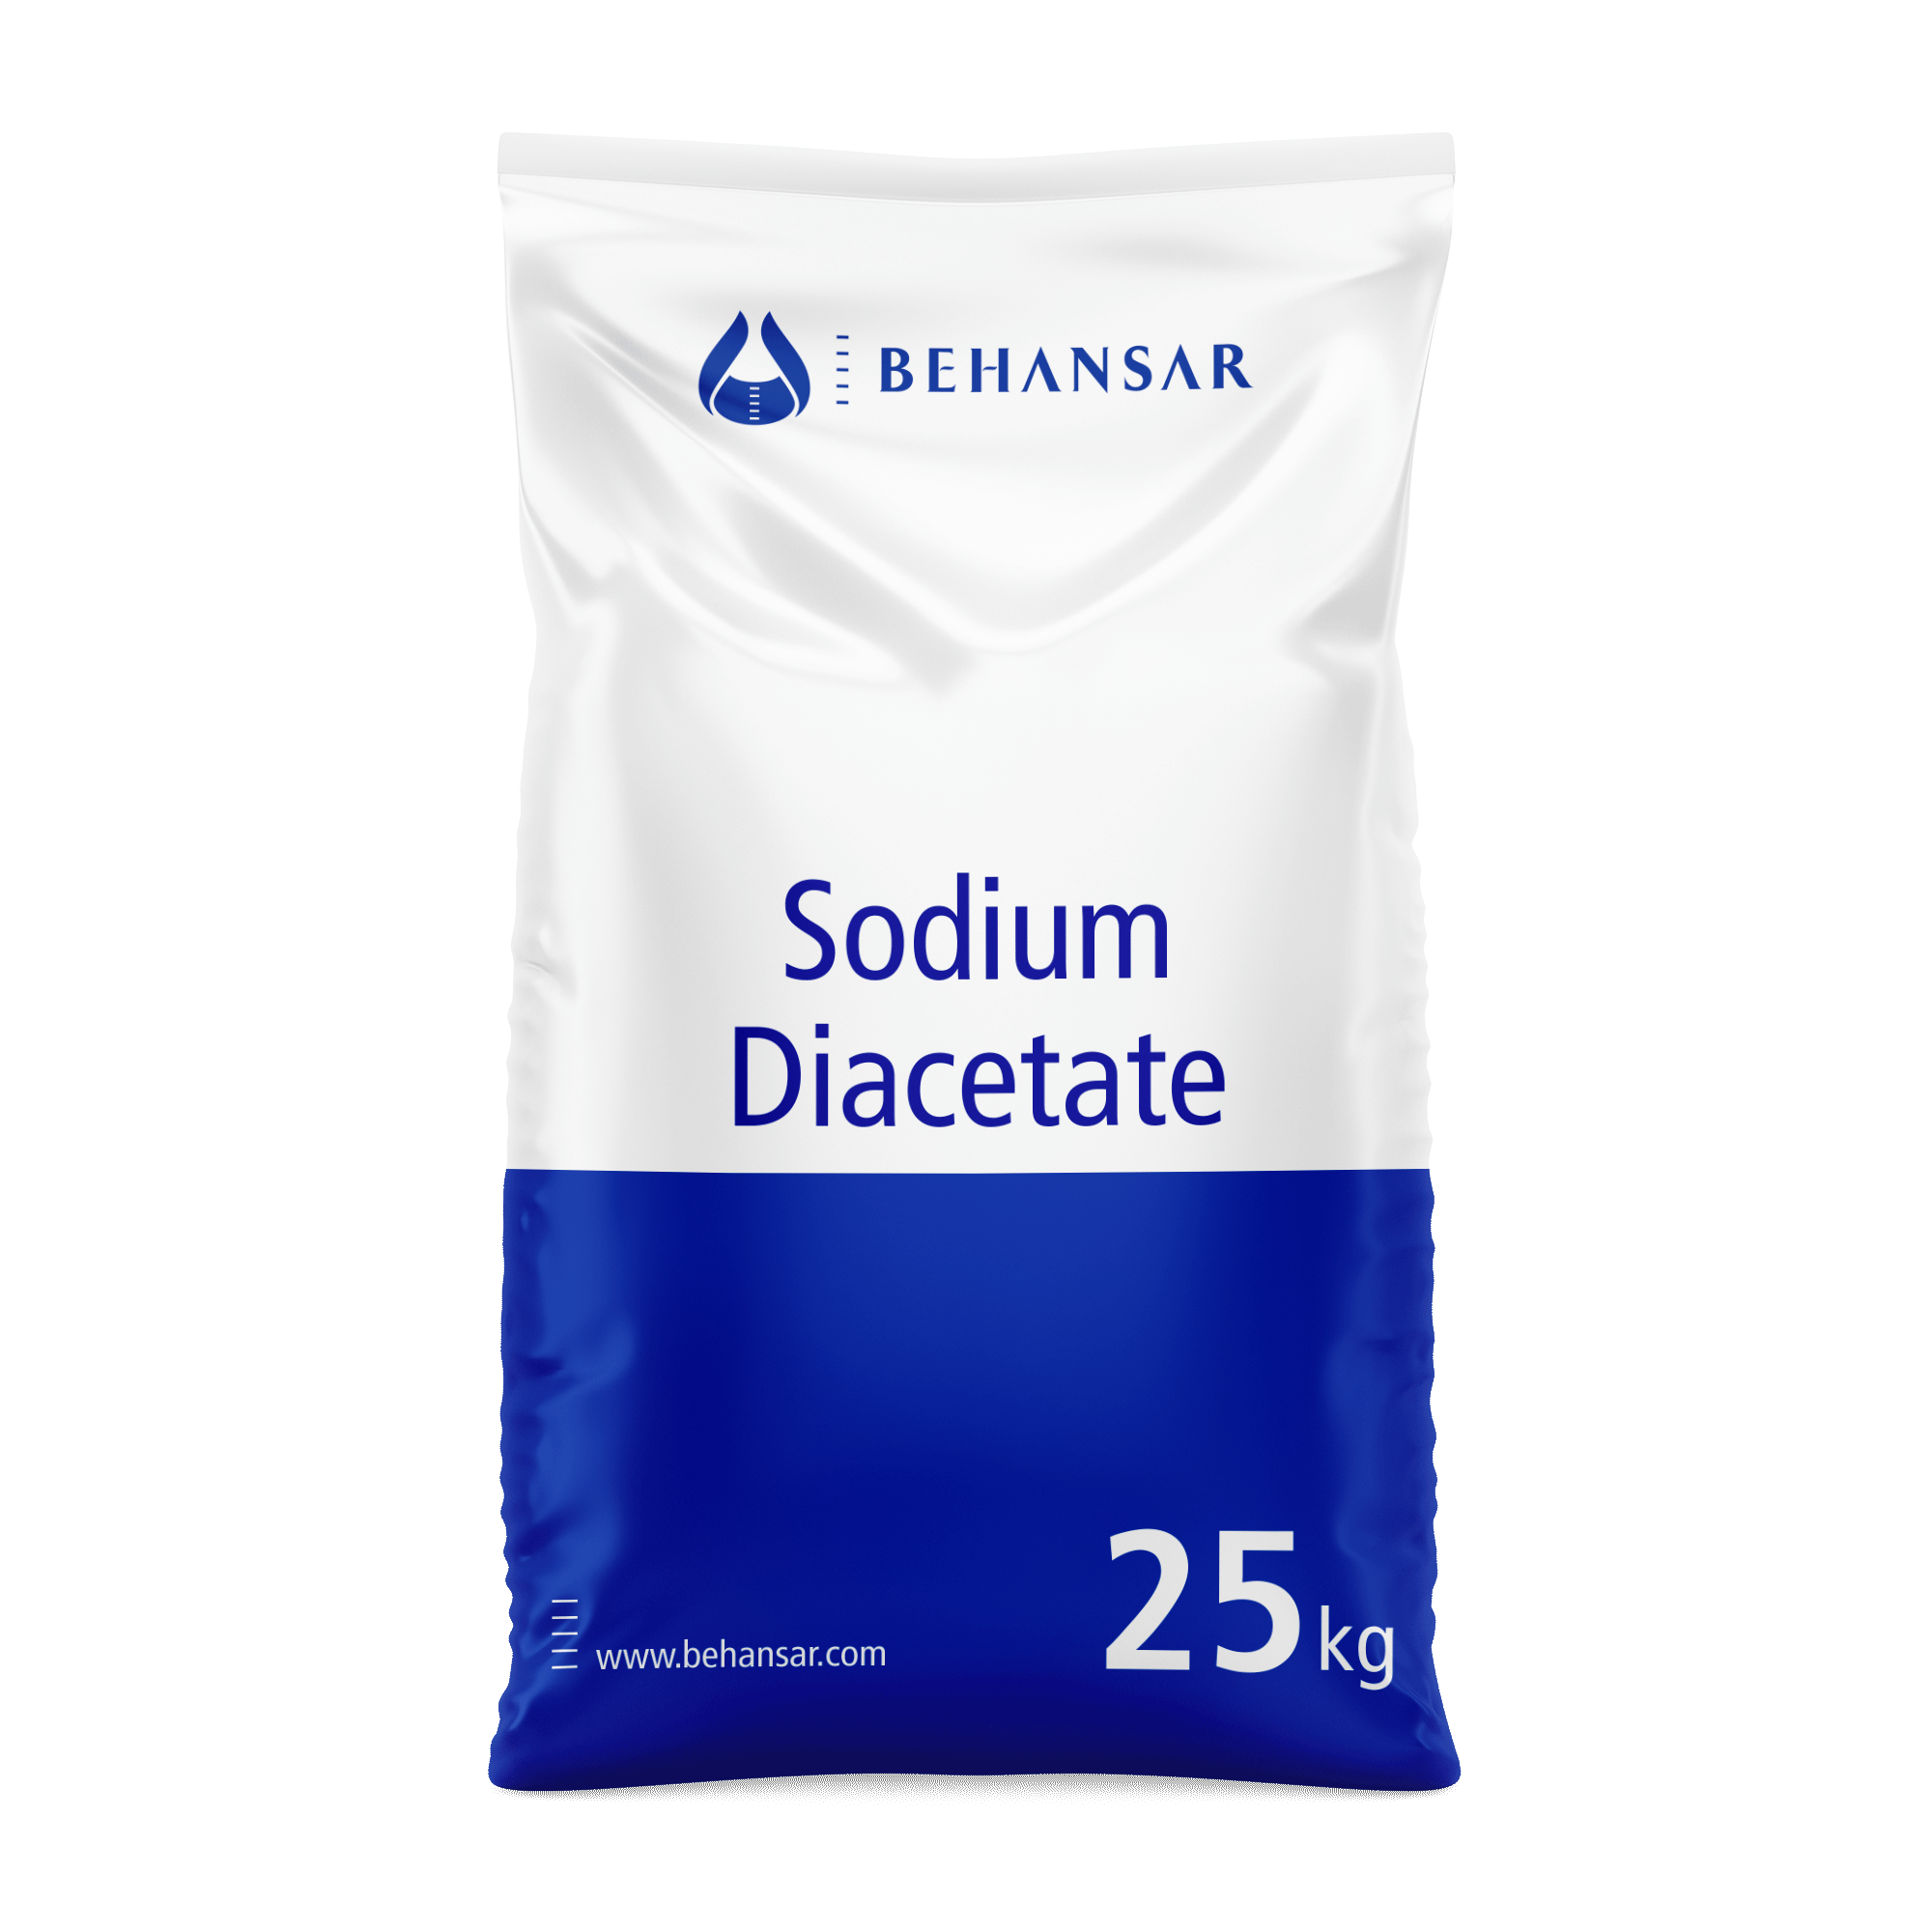 Sodium Diacetate is one of the products of Behansar Co